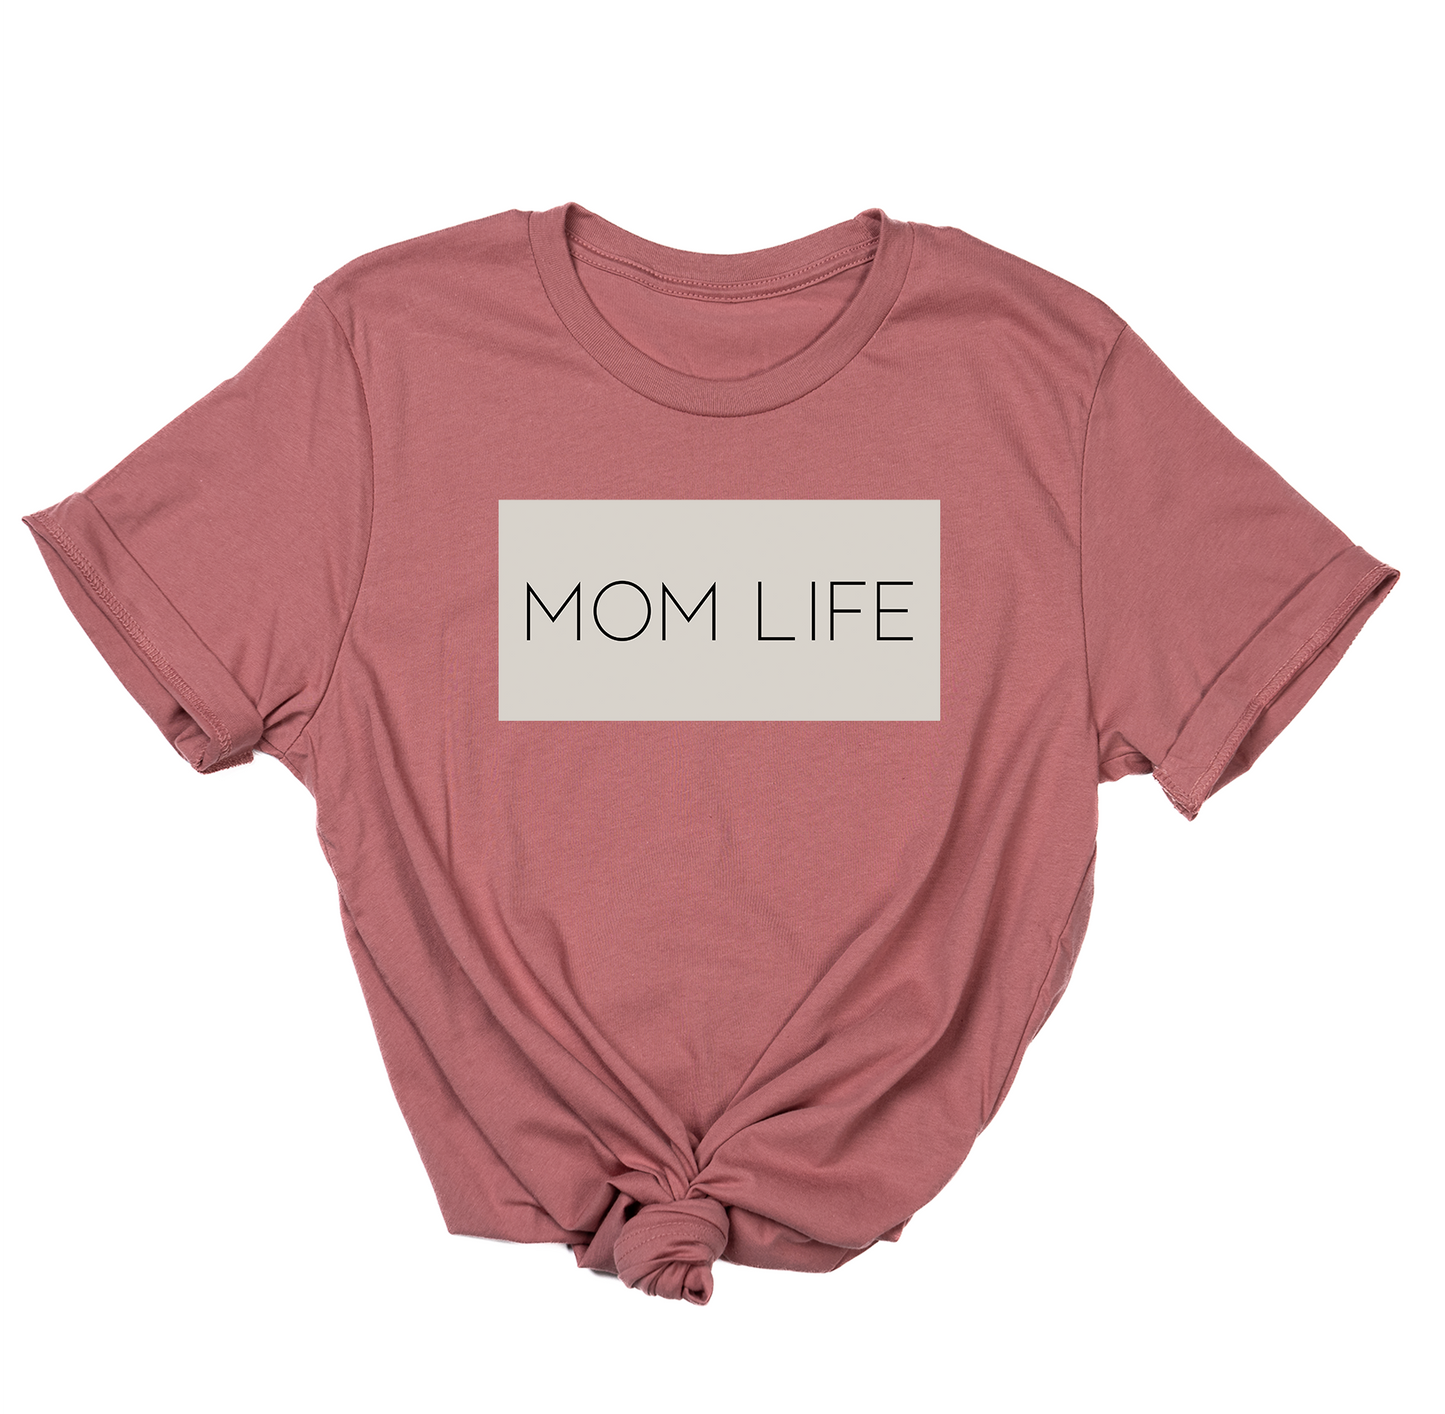 Mom Life (Boxed Collection, Stone Box/Black Text, Across Front) - Tee (Mauve)